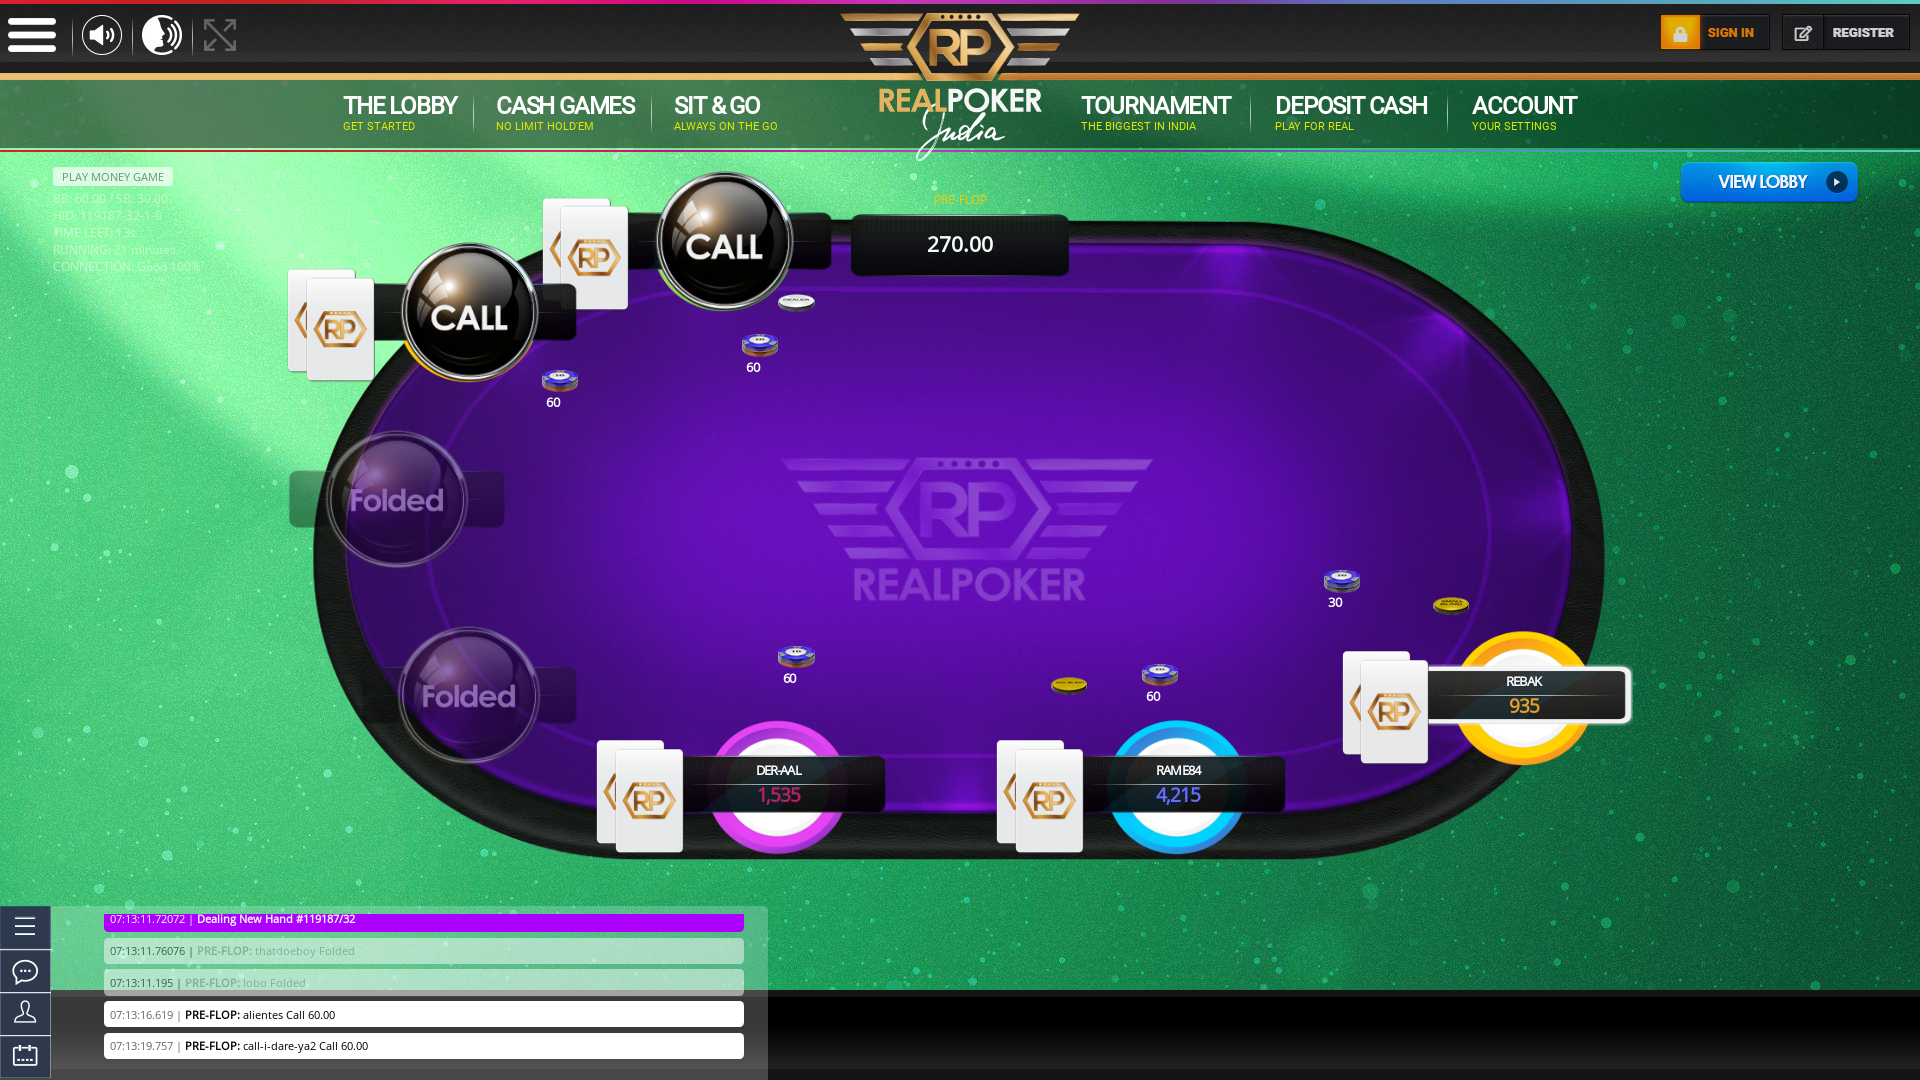 Real poker 10 player table in the 20th minute of the match